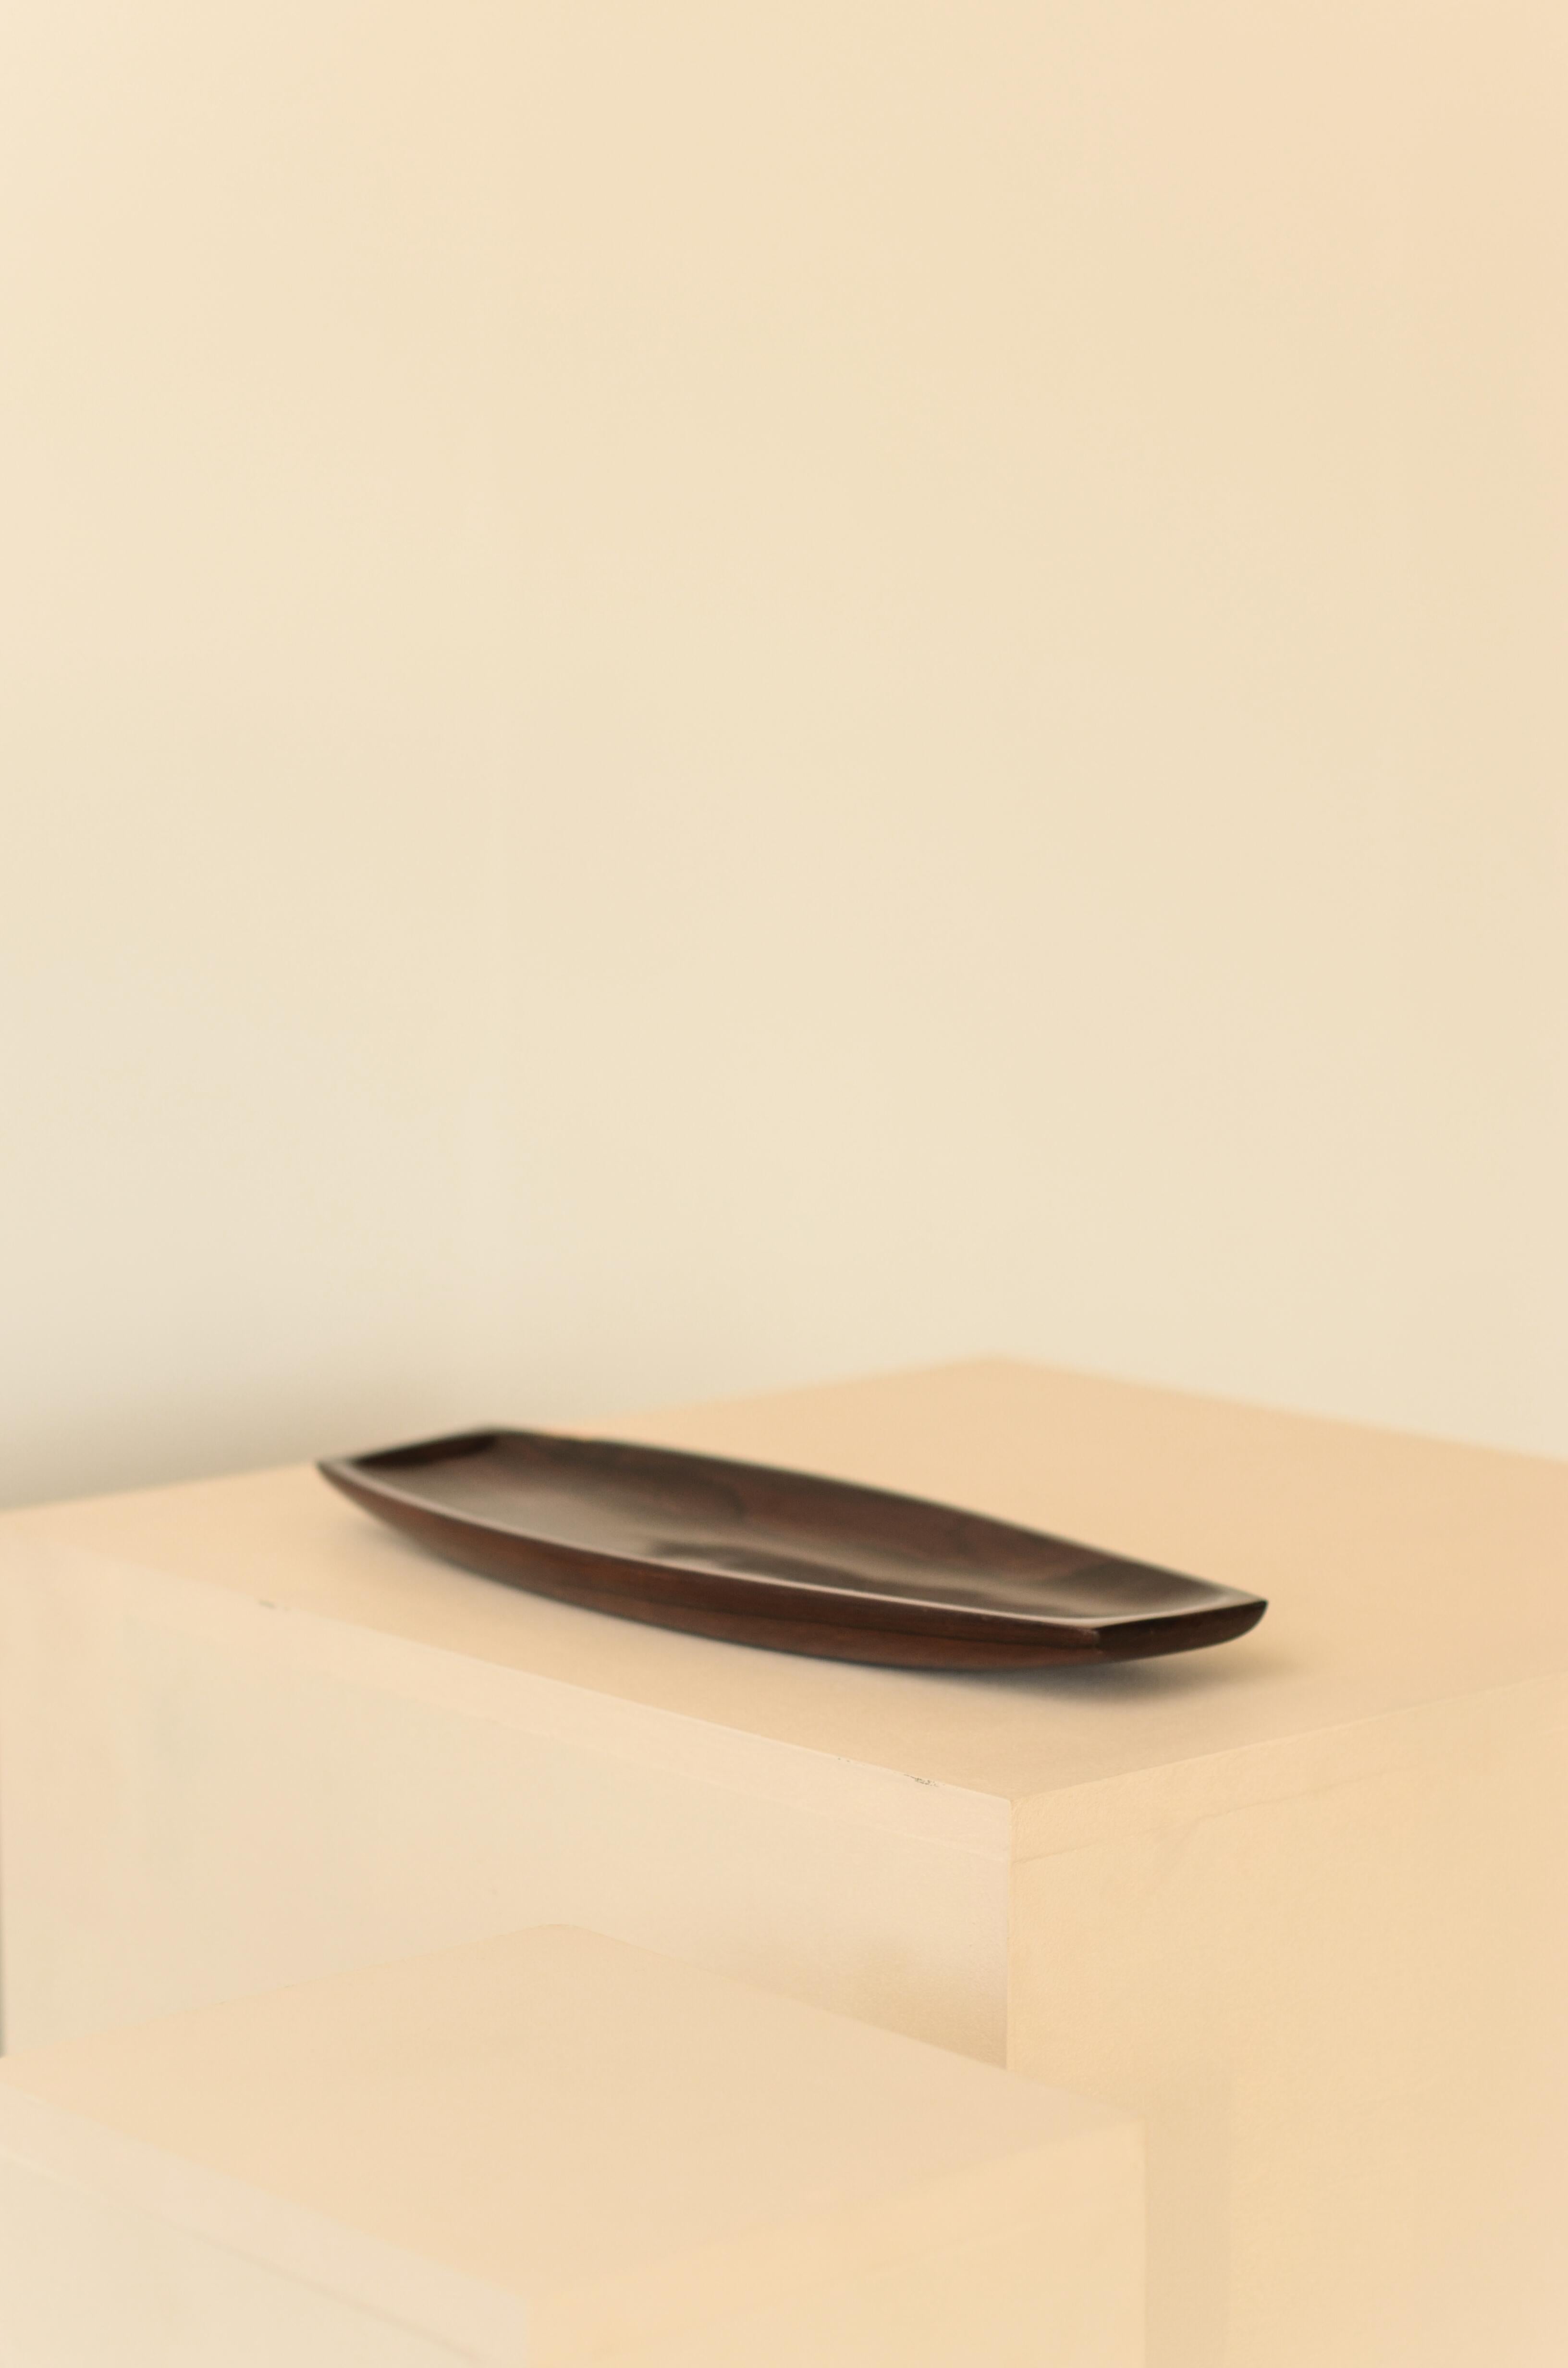 Solid rosewood platter by Jean Gillon model 704 from the WoodArt catalogue.

Jean Gillon (1919-2007) was born in Romania, where he graduated in Architecture and Fine Arts. In 1956 he moved to Brazil, where he developed an impressive and vast work as